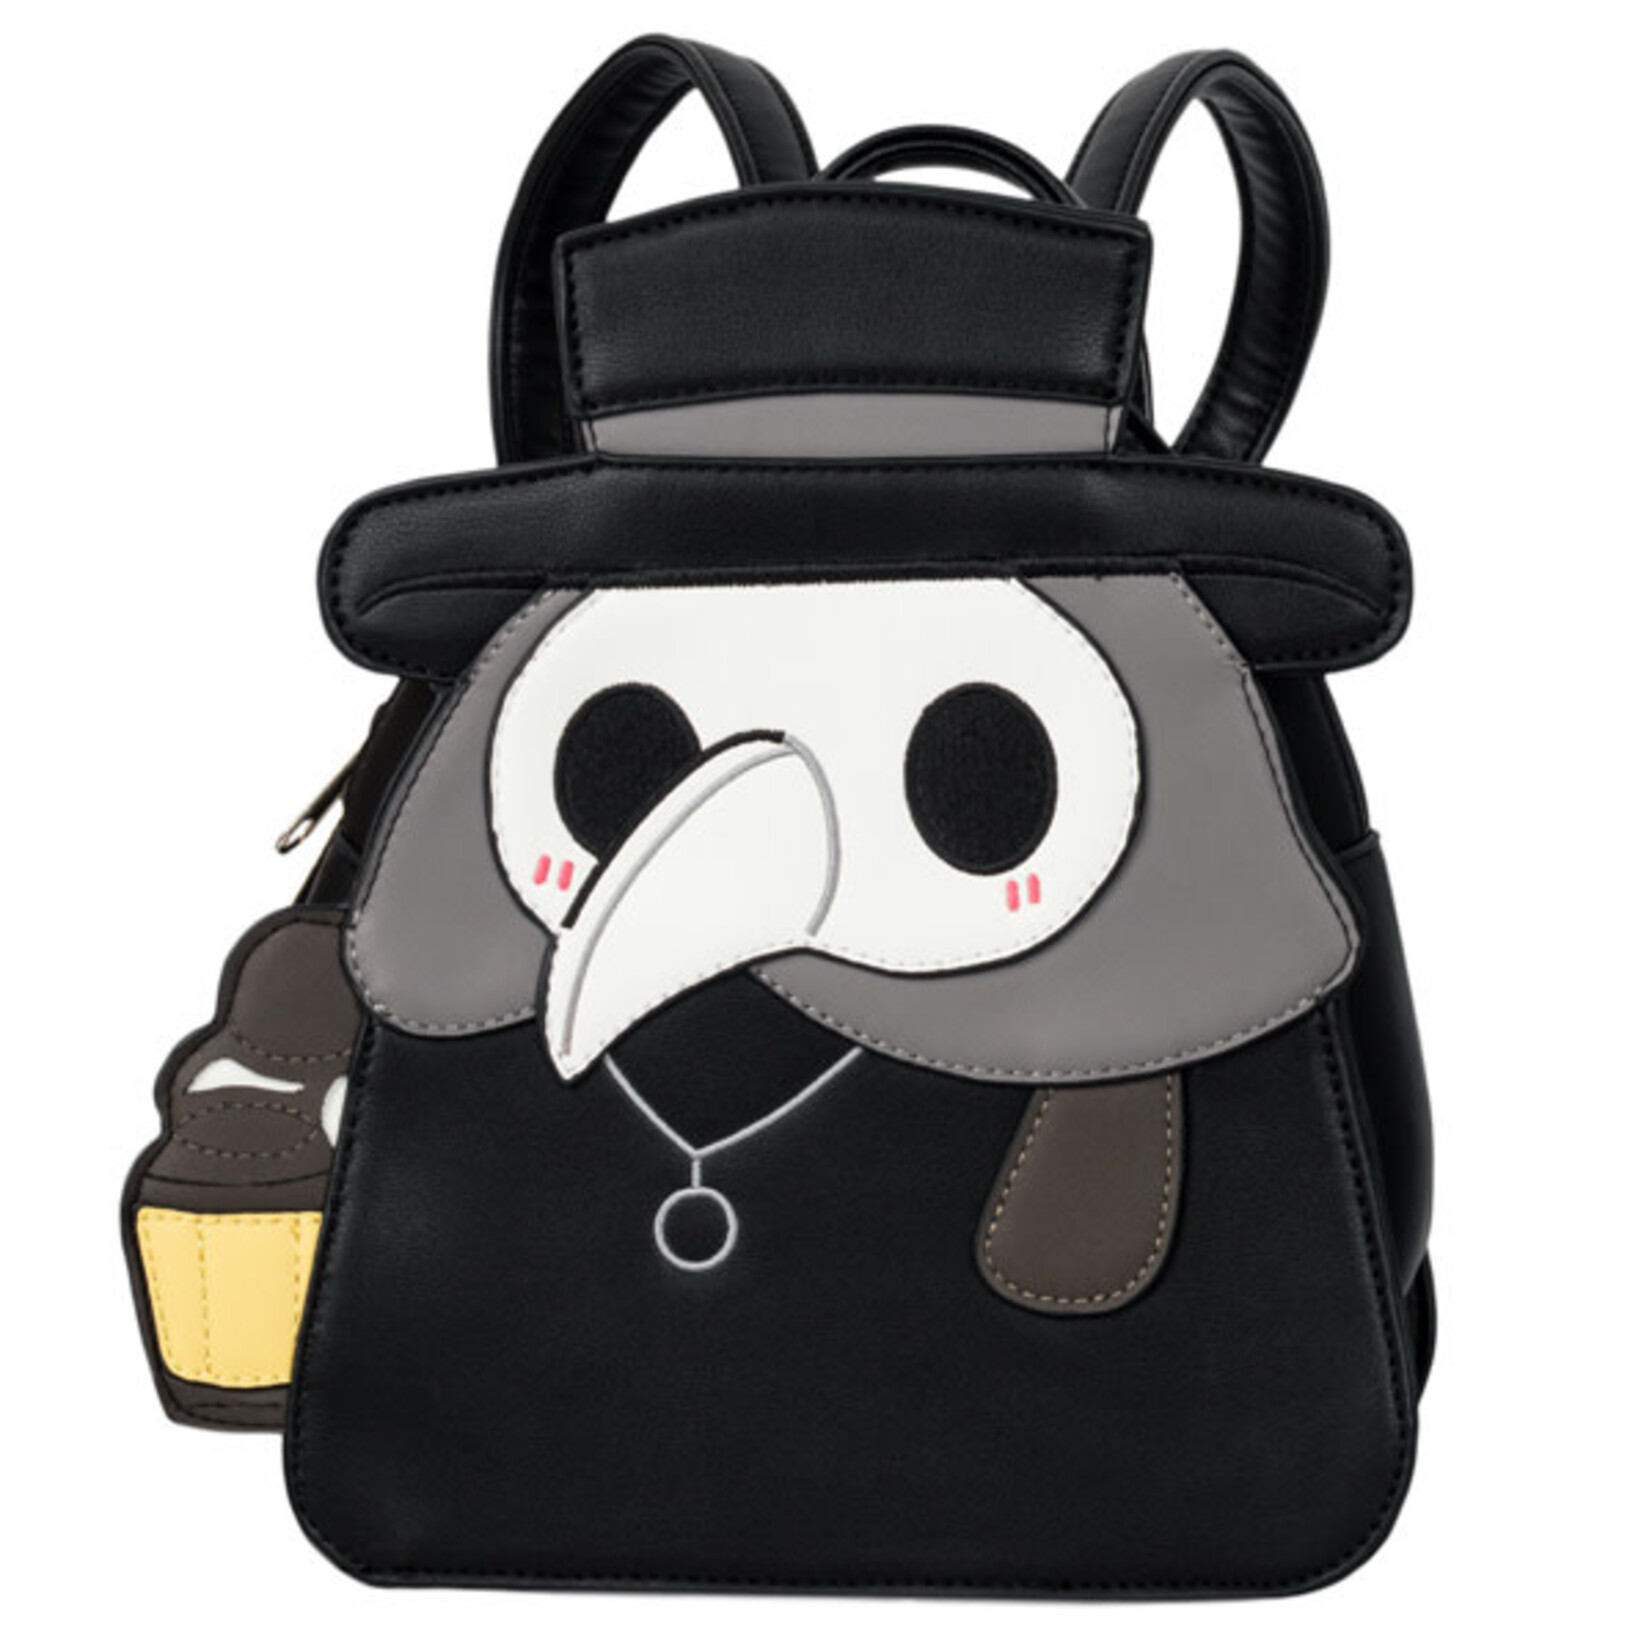 Squishable Mini-Backpack, Plague Doctor